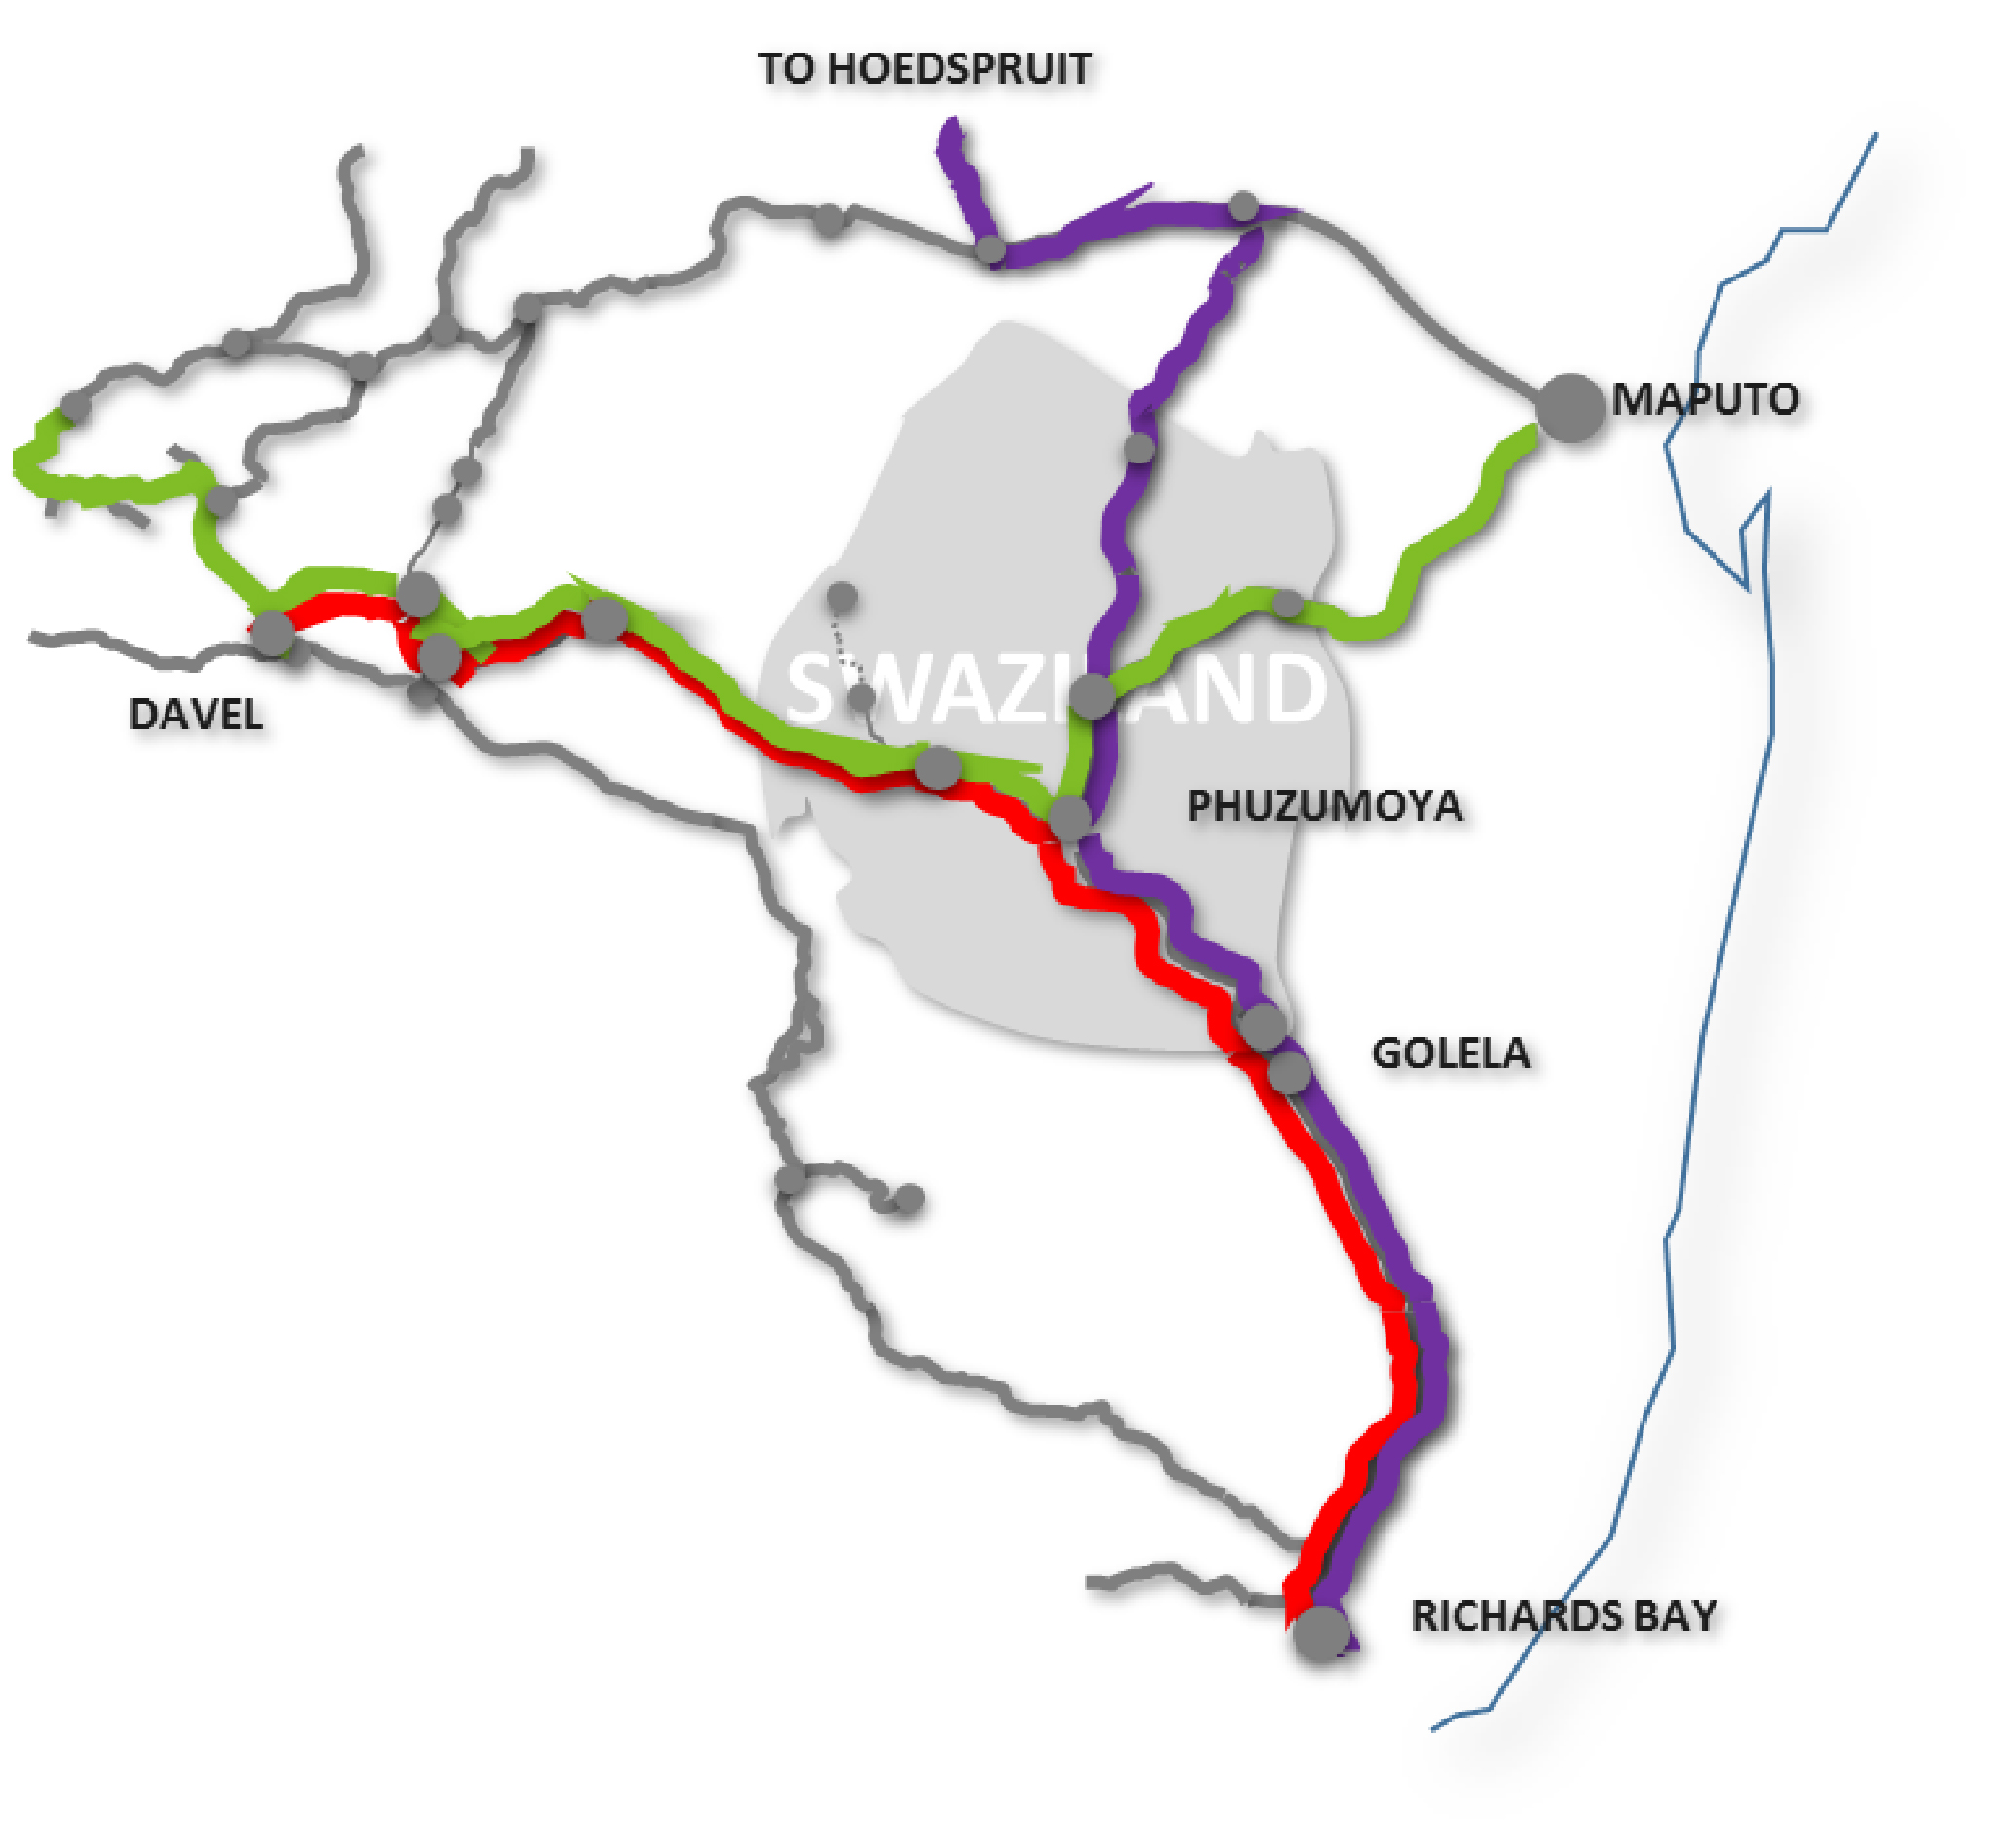 The Eswatini Railways System Map with added details of the new Eswatini Rail Link Project.